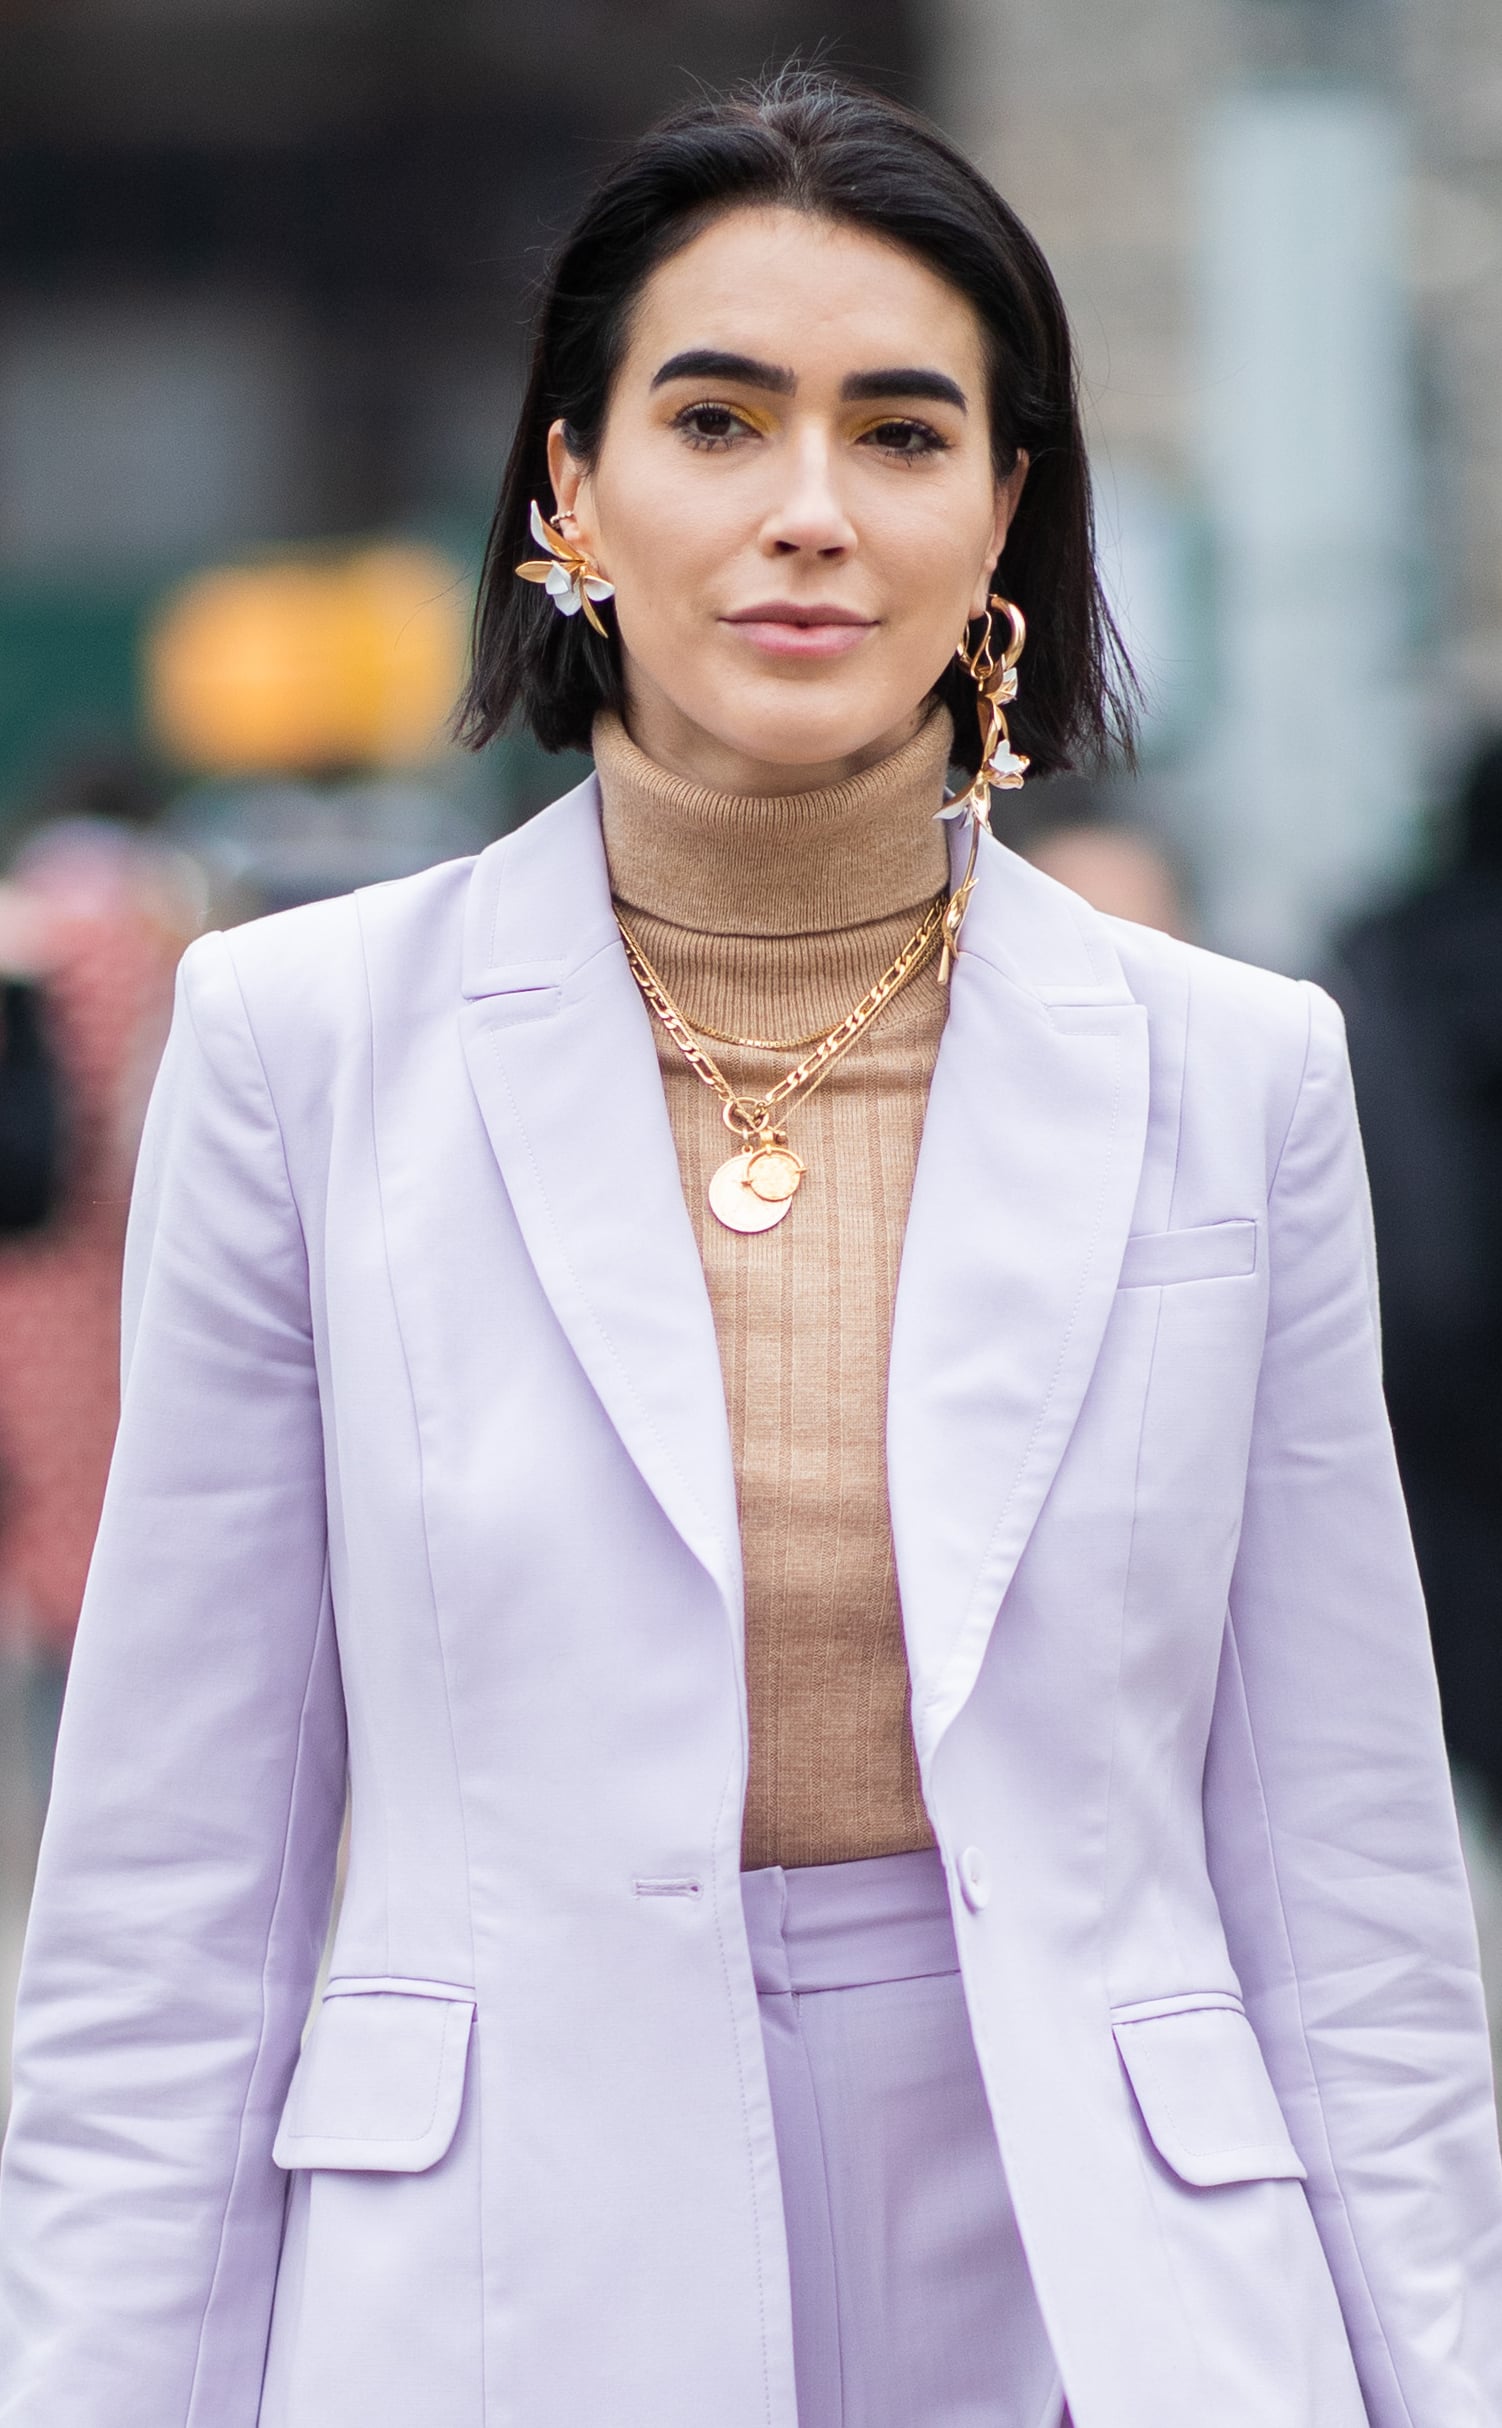 The Fall Jewellery Trend: Layered Necklaces